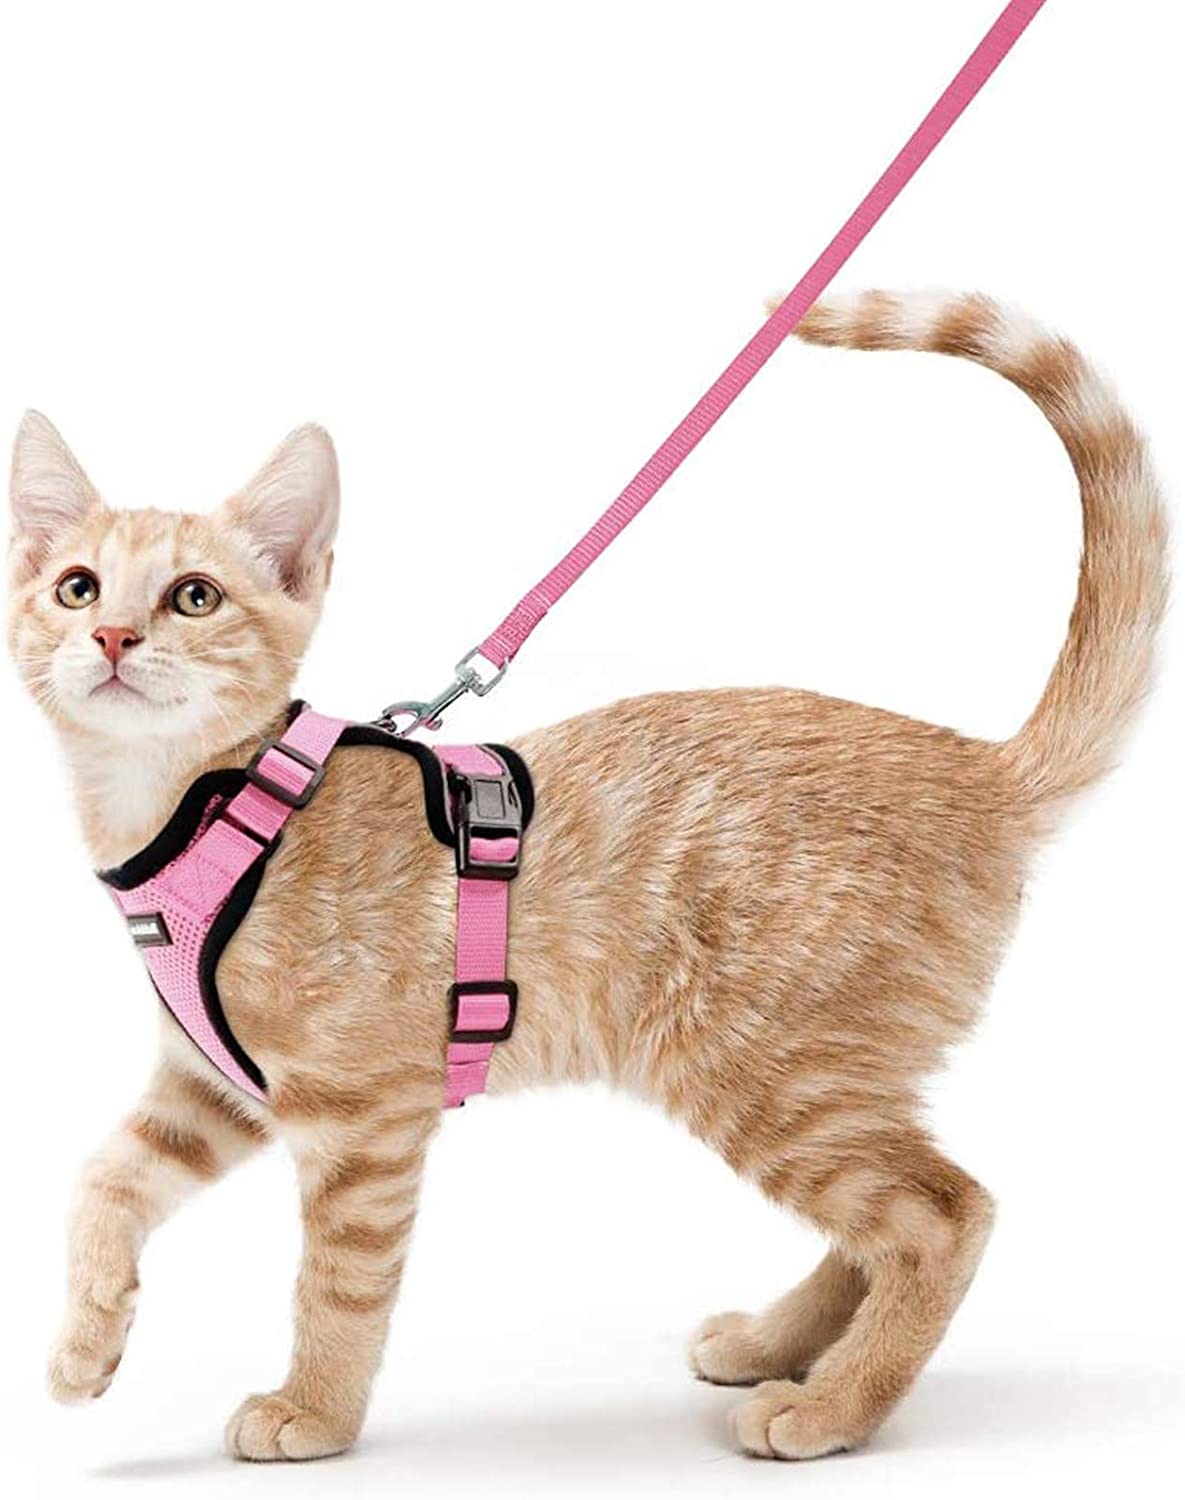 Cat Harness and Leash - Pink / XS - cat harness leash